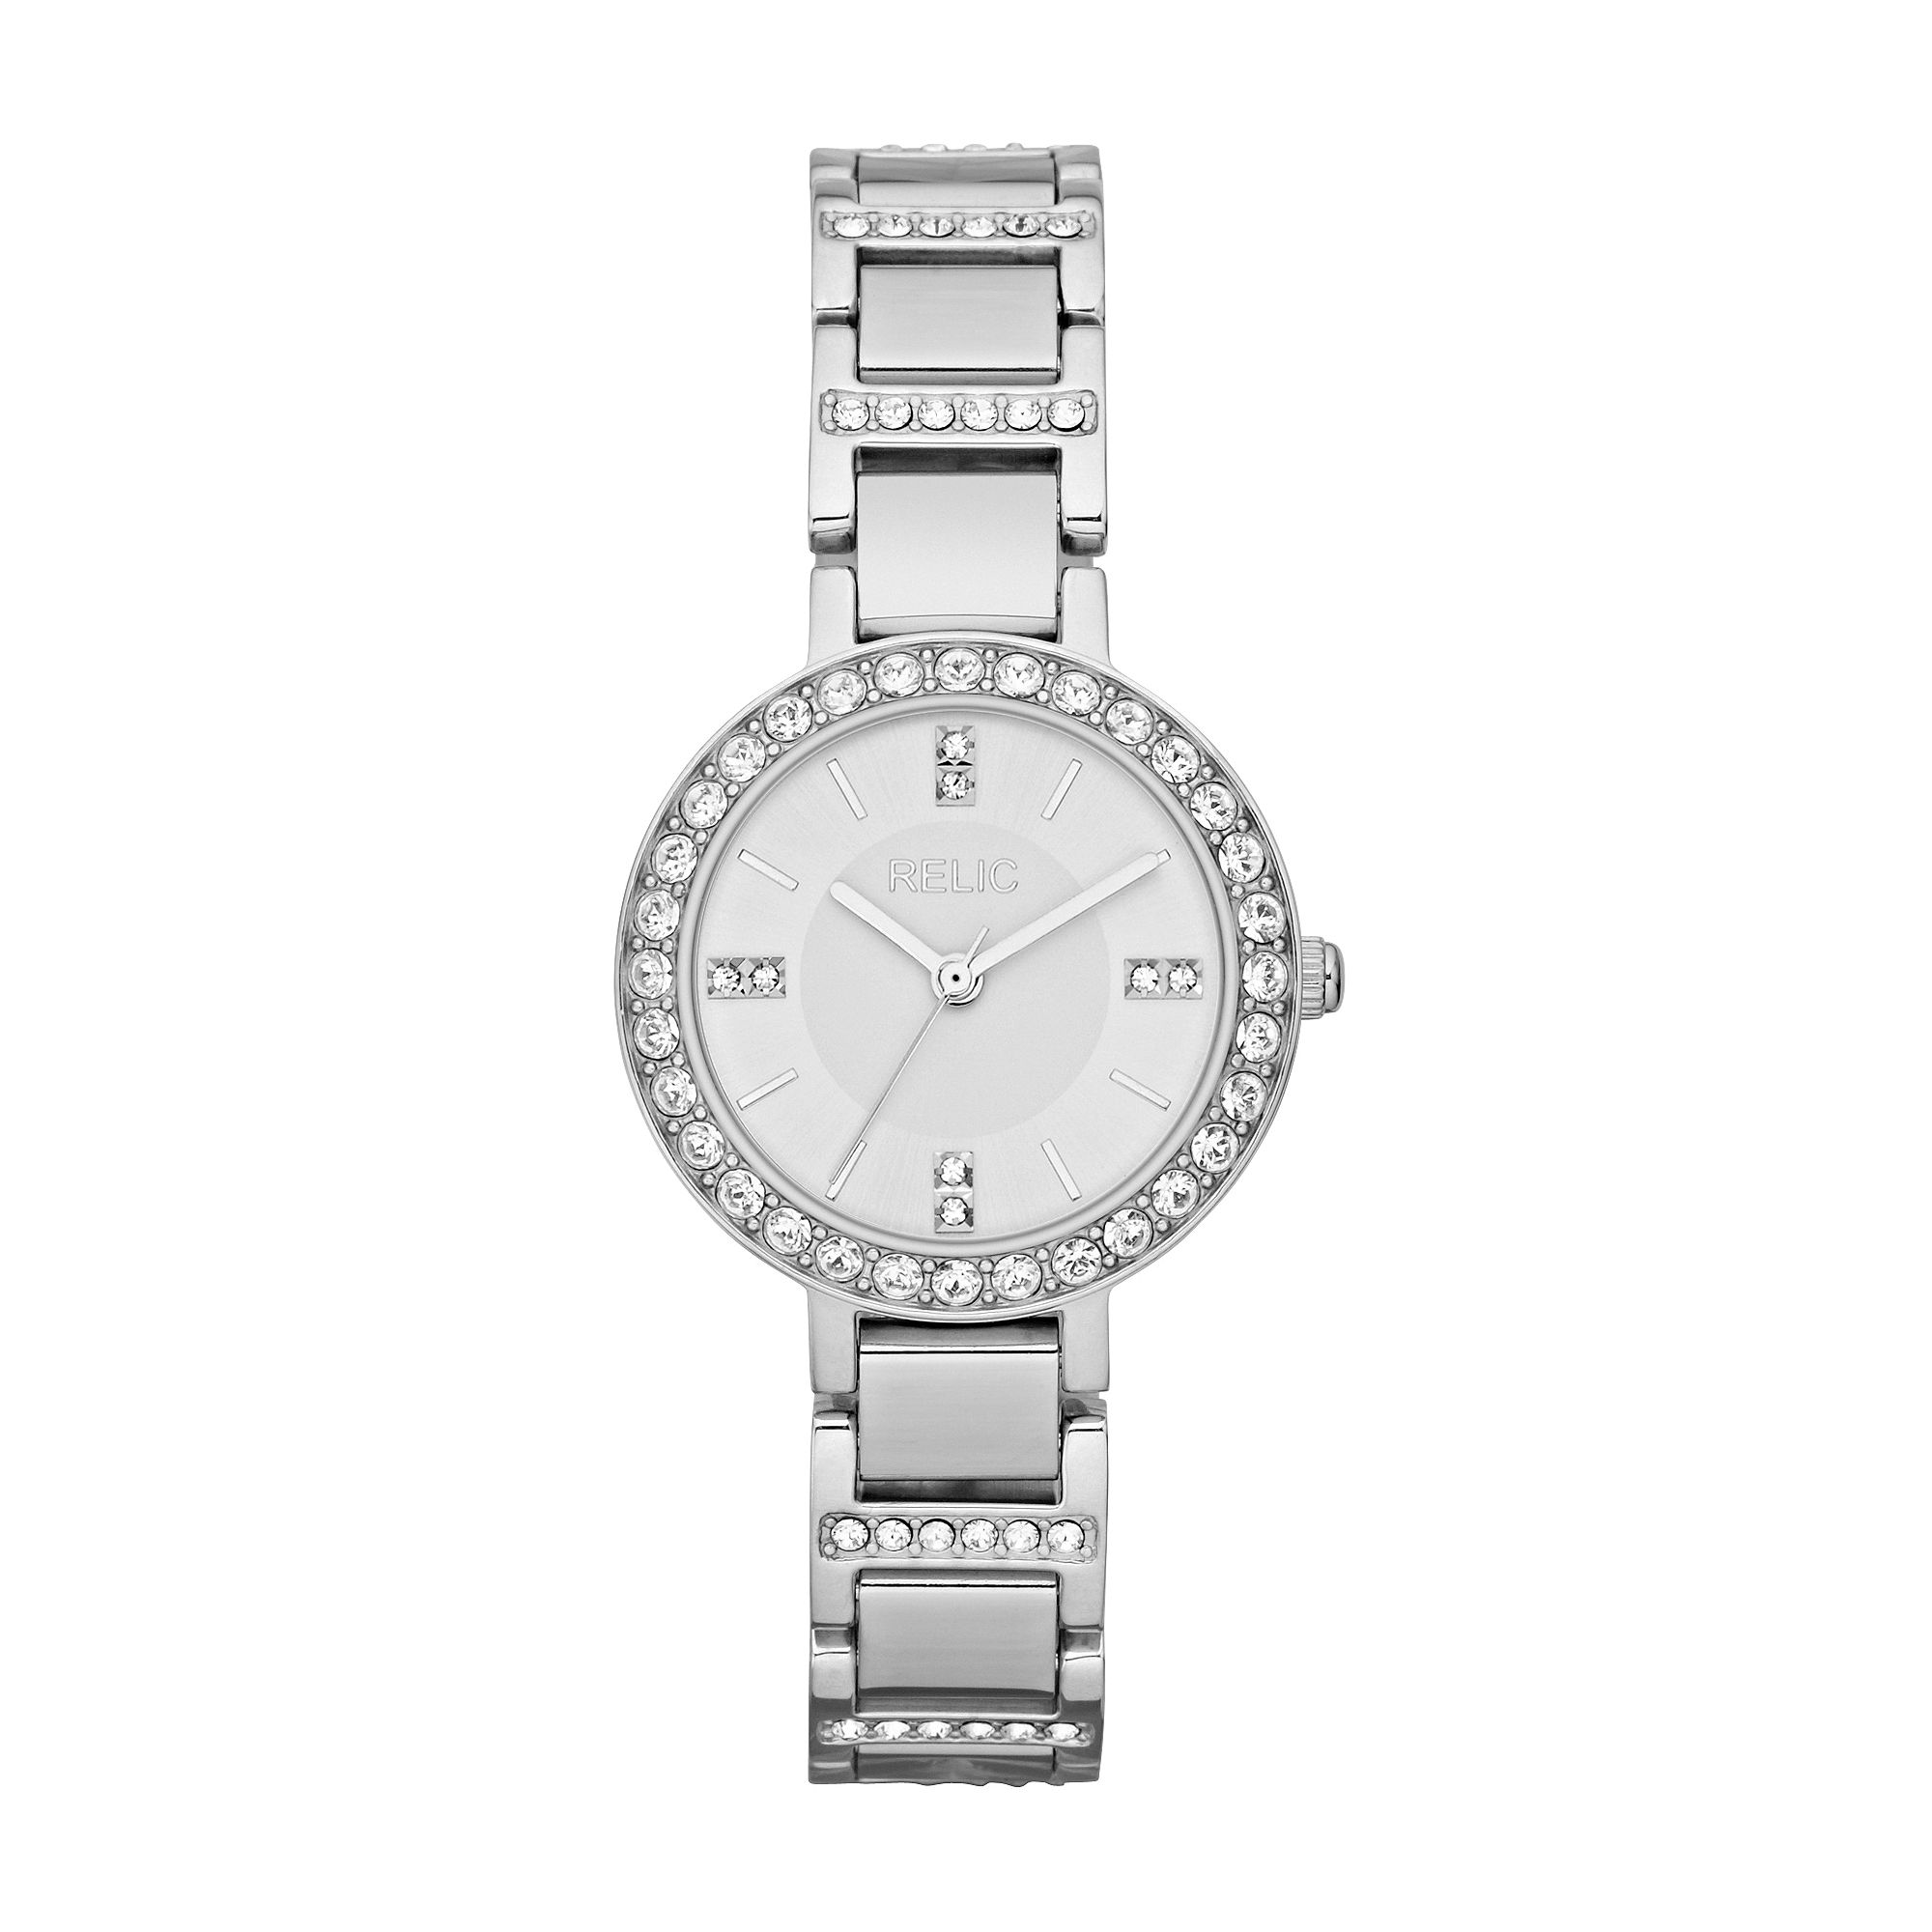 UPC 723765250076 product image for Relic Womens Silver-Tone w/ Crystals Watch | upcitemdb.com